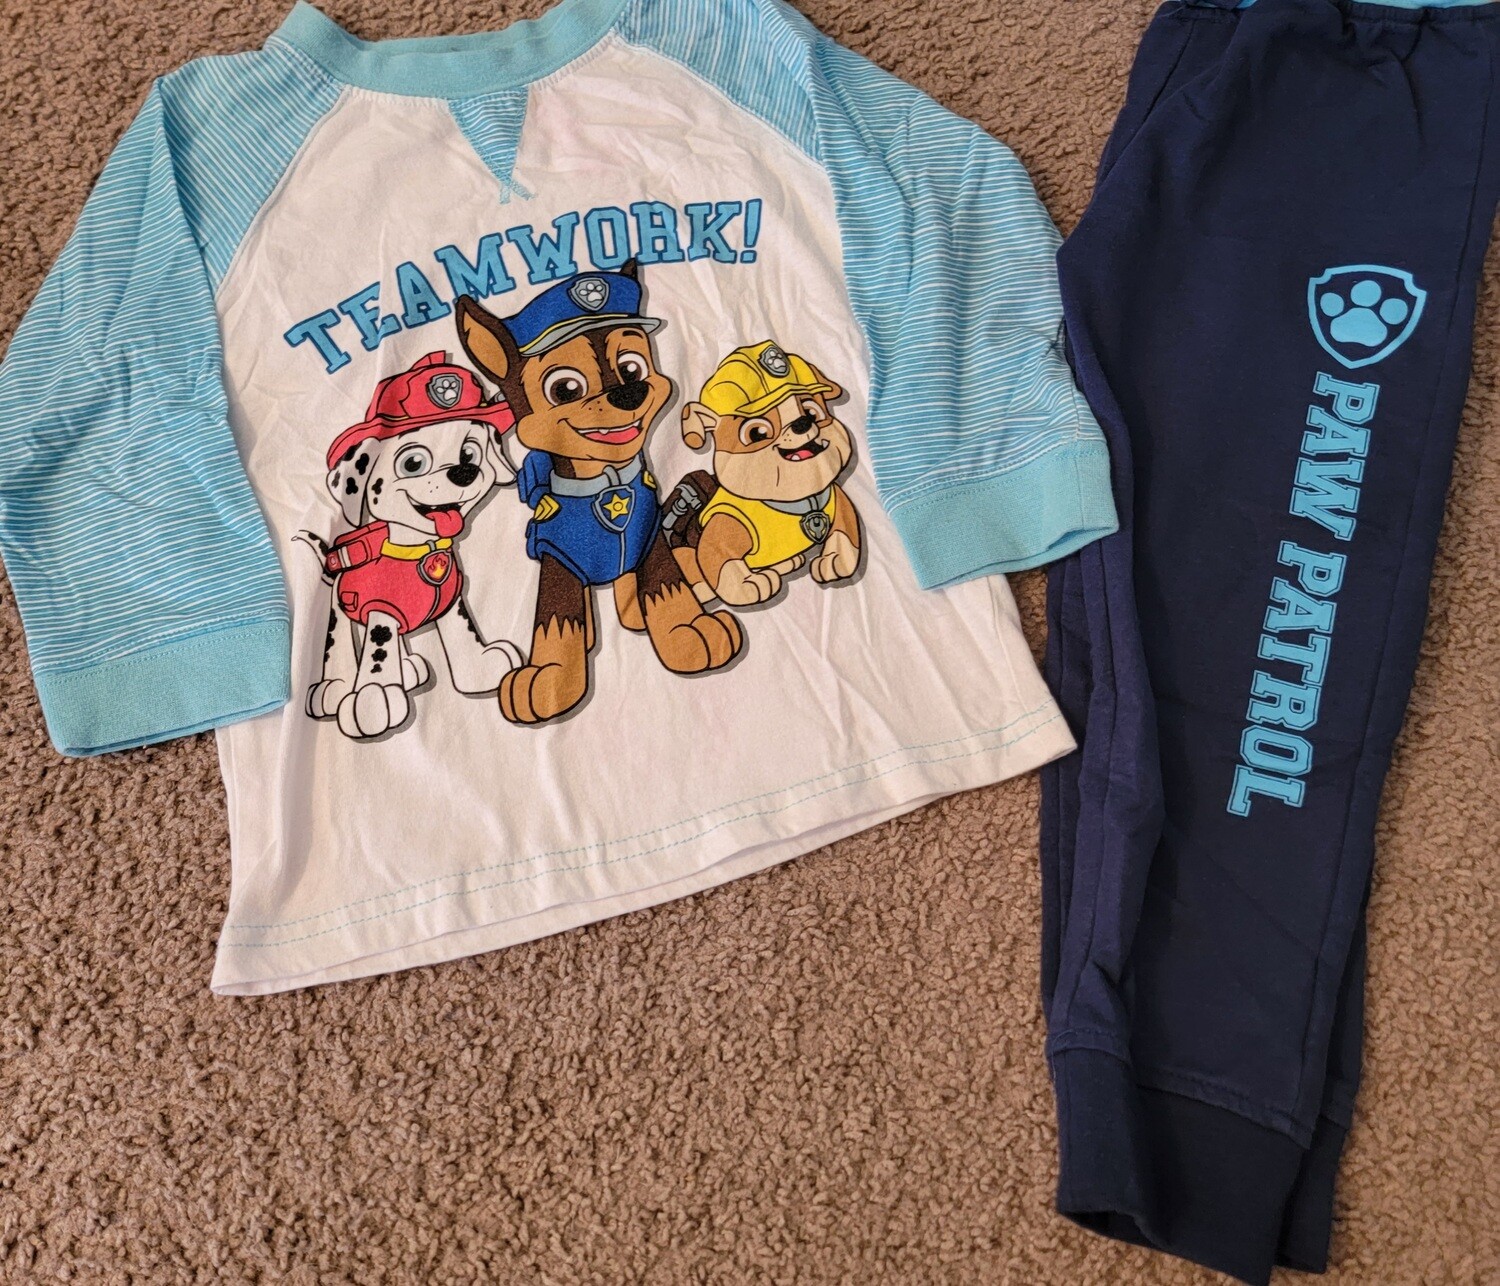 Paw patrol outfit